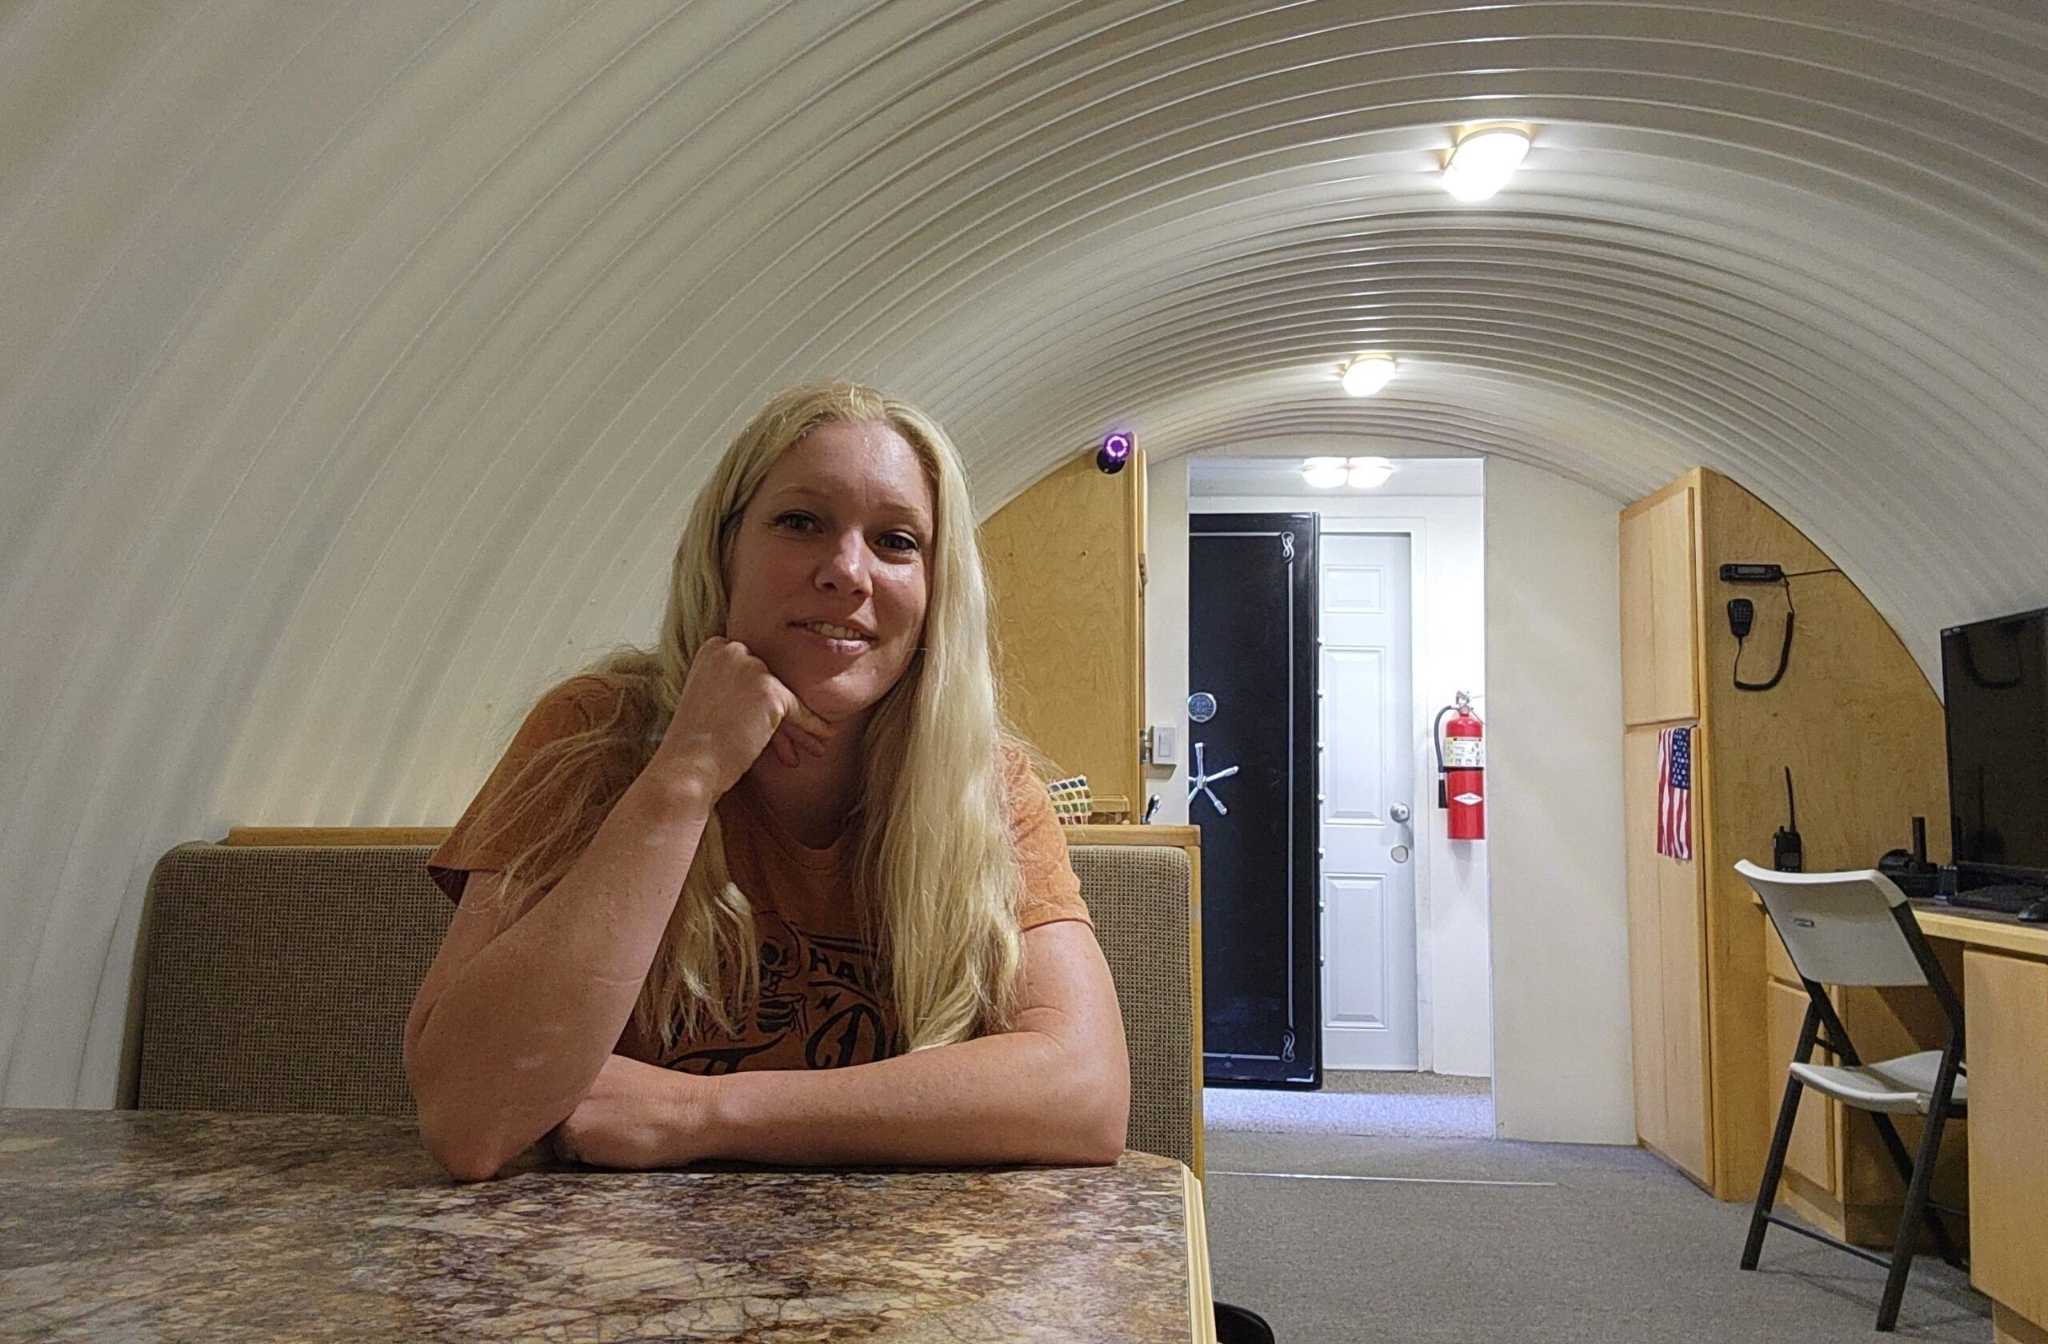 'I Live in an Underground Bunker'—but It's Not To Avoid the Apocalypse